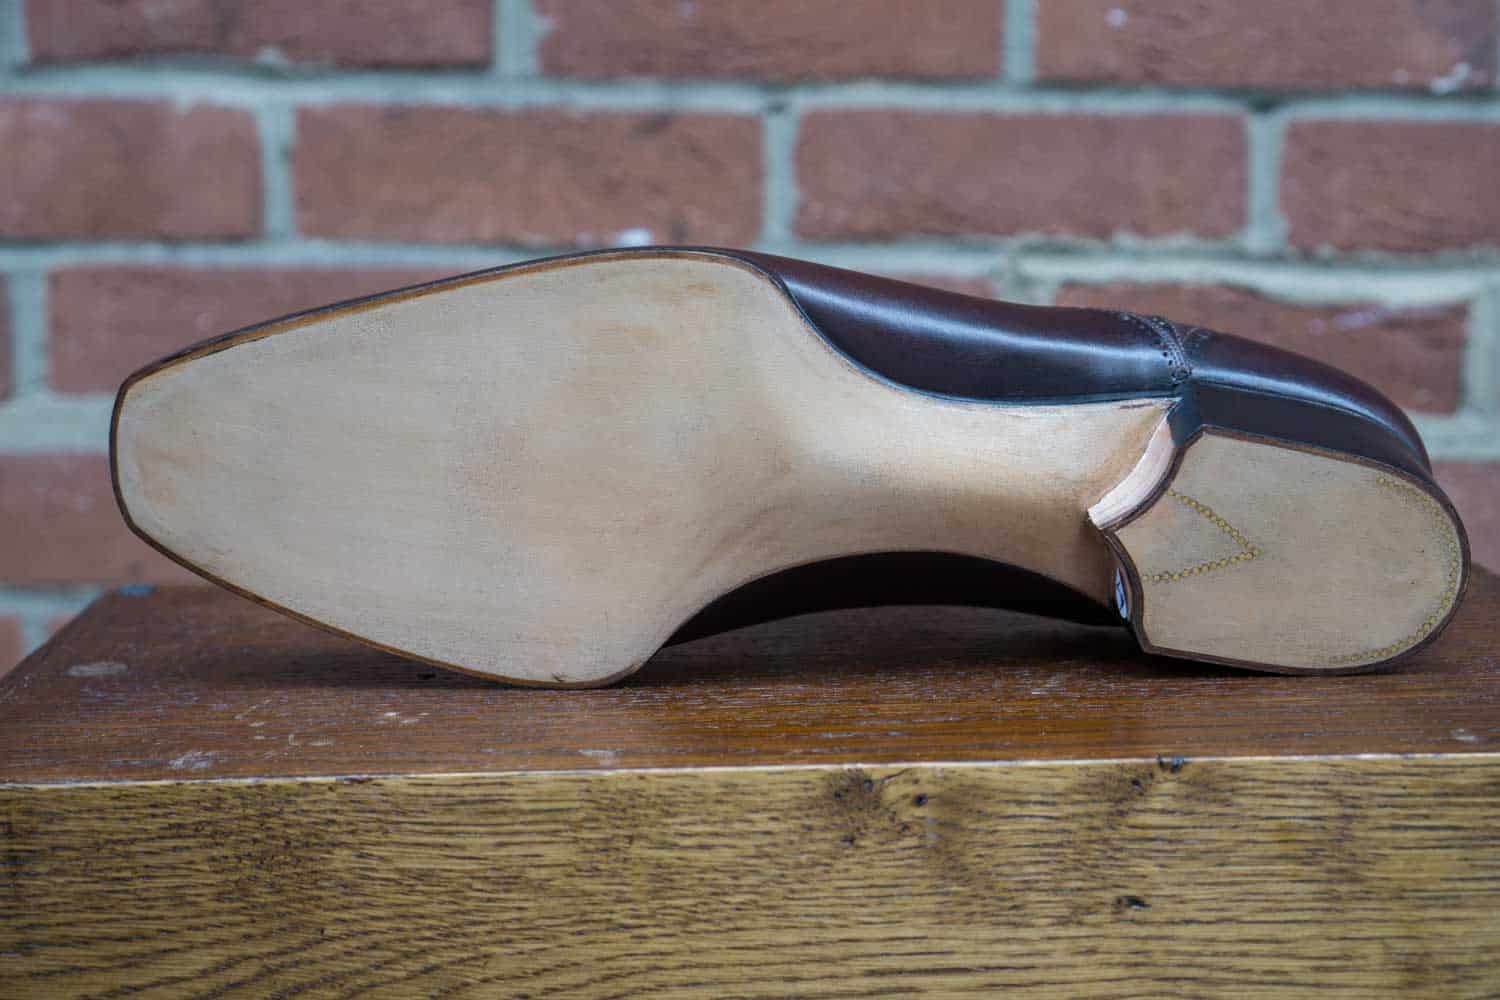 WORLD CHAMPIONSHIPS IN SHOEMAKING 2019 THE COMPETITION SHOES PART 2